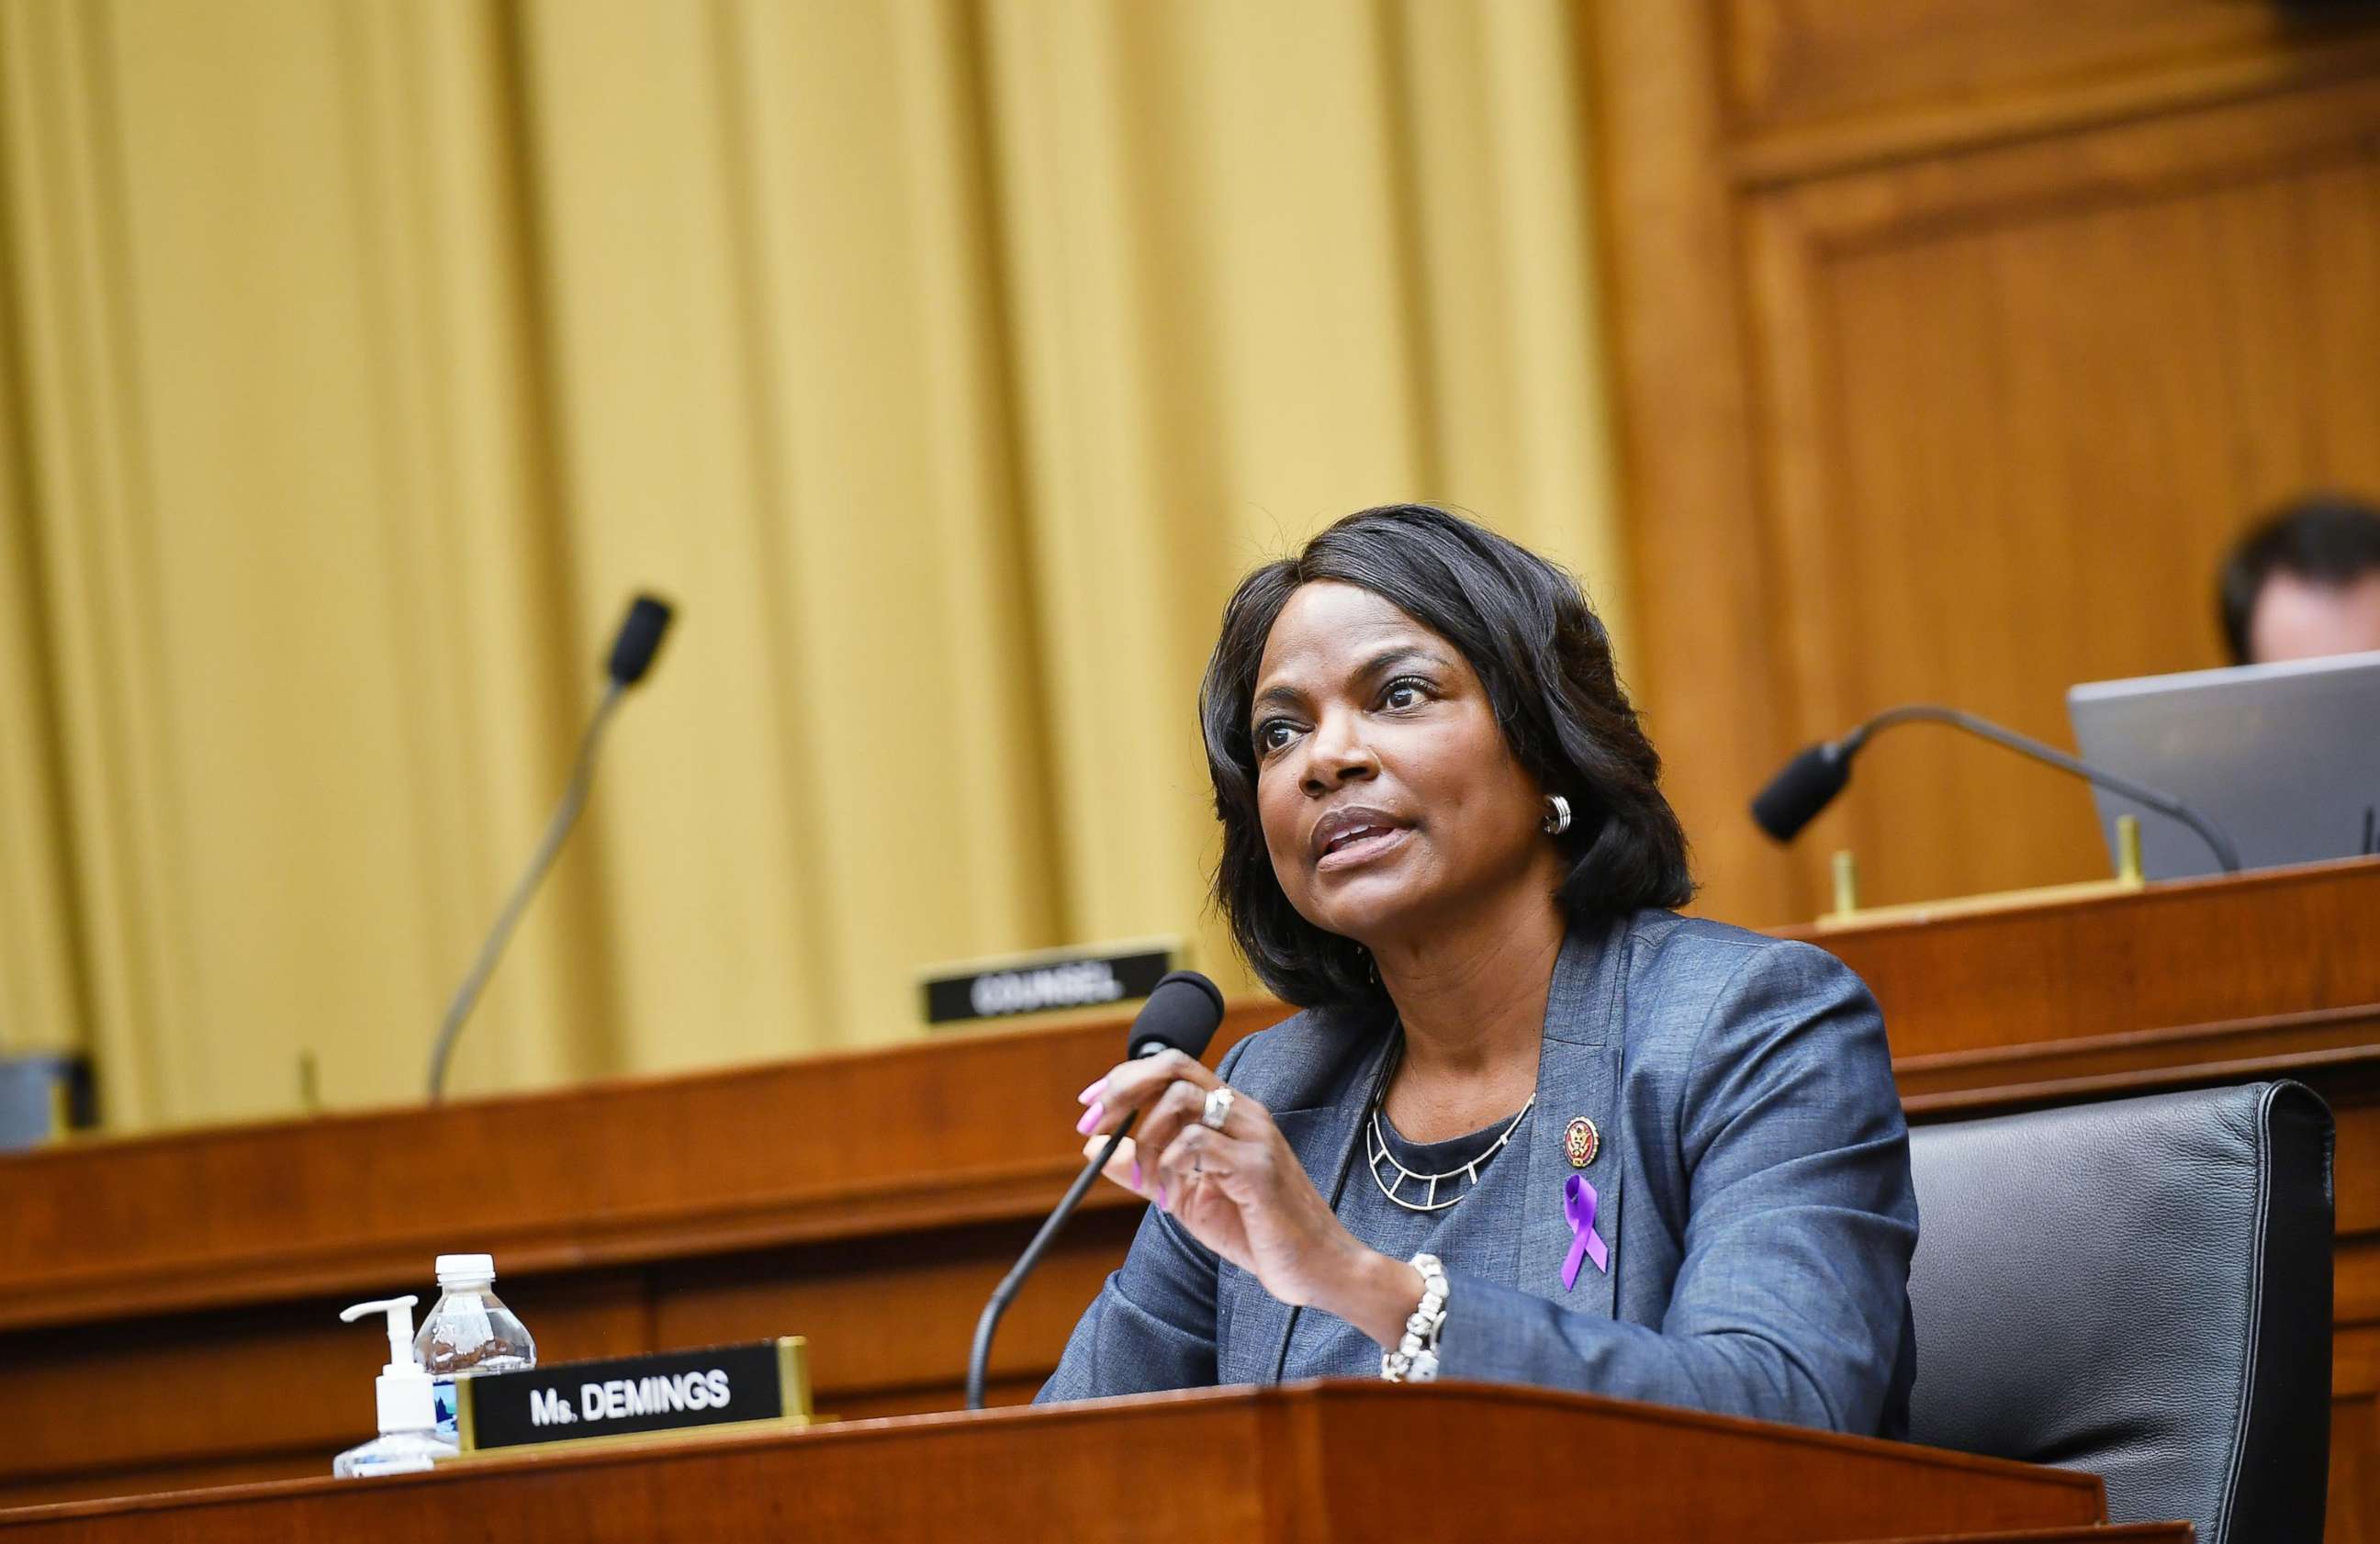 PHOTO: In this July 29, 2020, file photo, Rep. Val Demings speaks during a House Judiciary Subcommittee on Antitrust, Commercial and Administrative Law hearing in the Rayburn House office Building on Capitol Hill in Washington, DC.